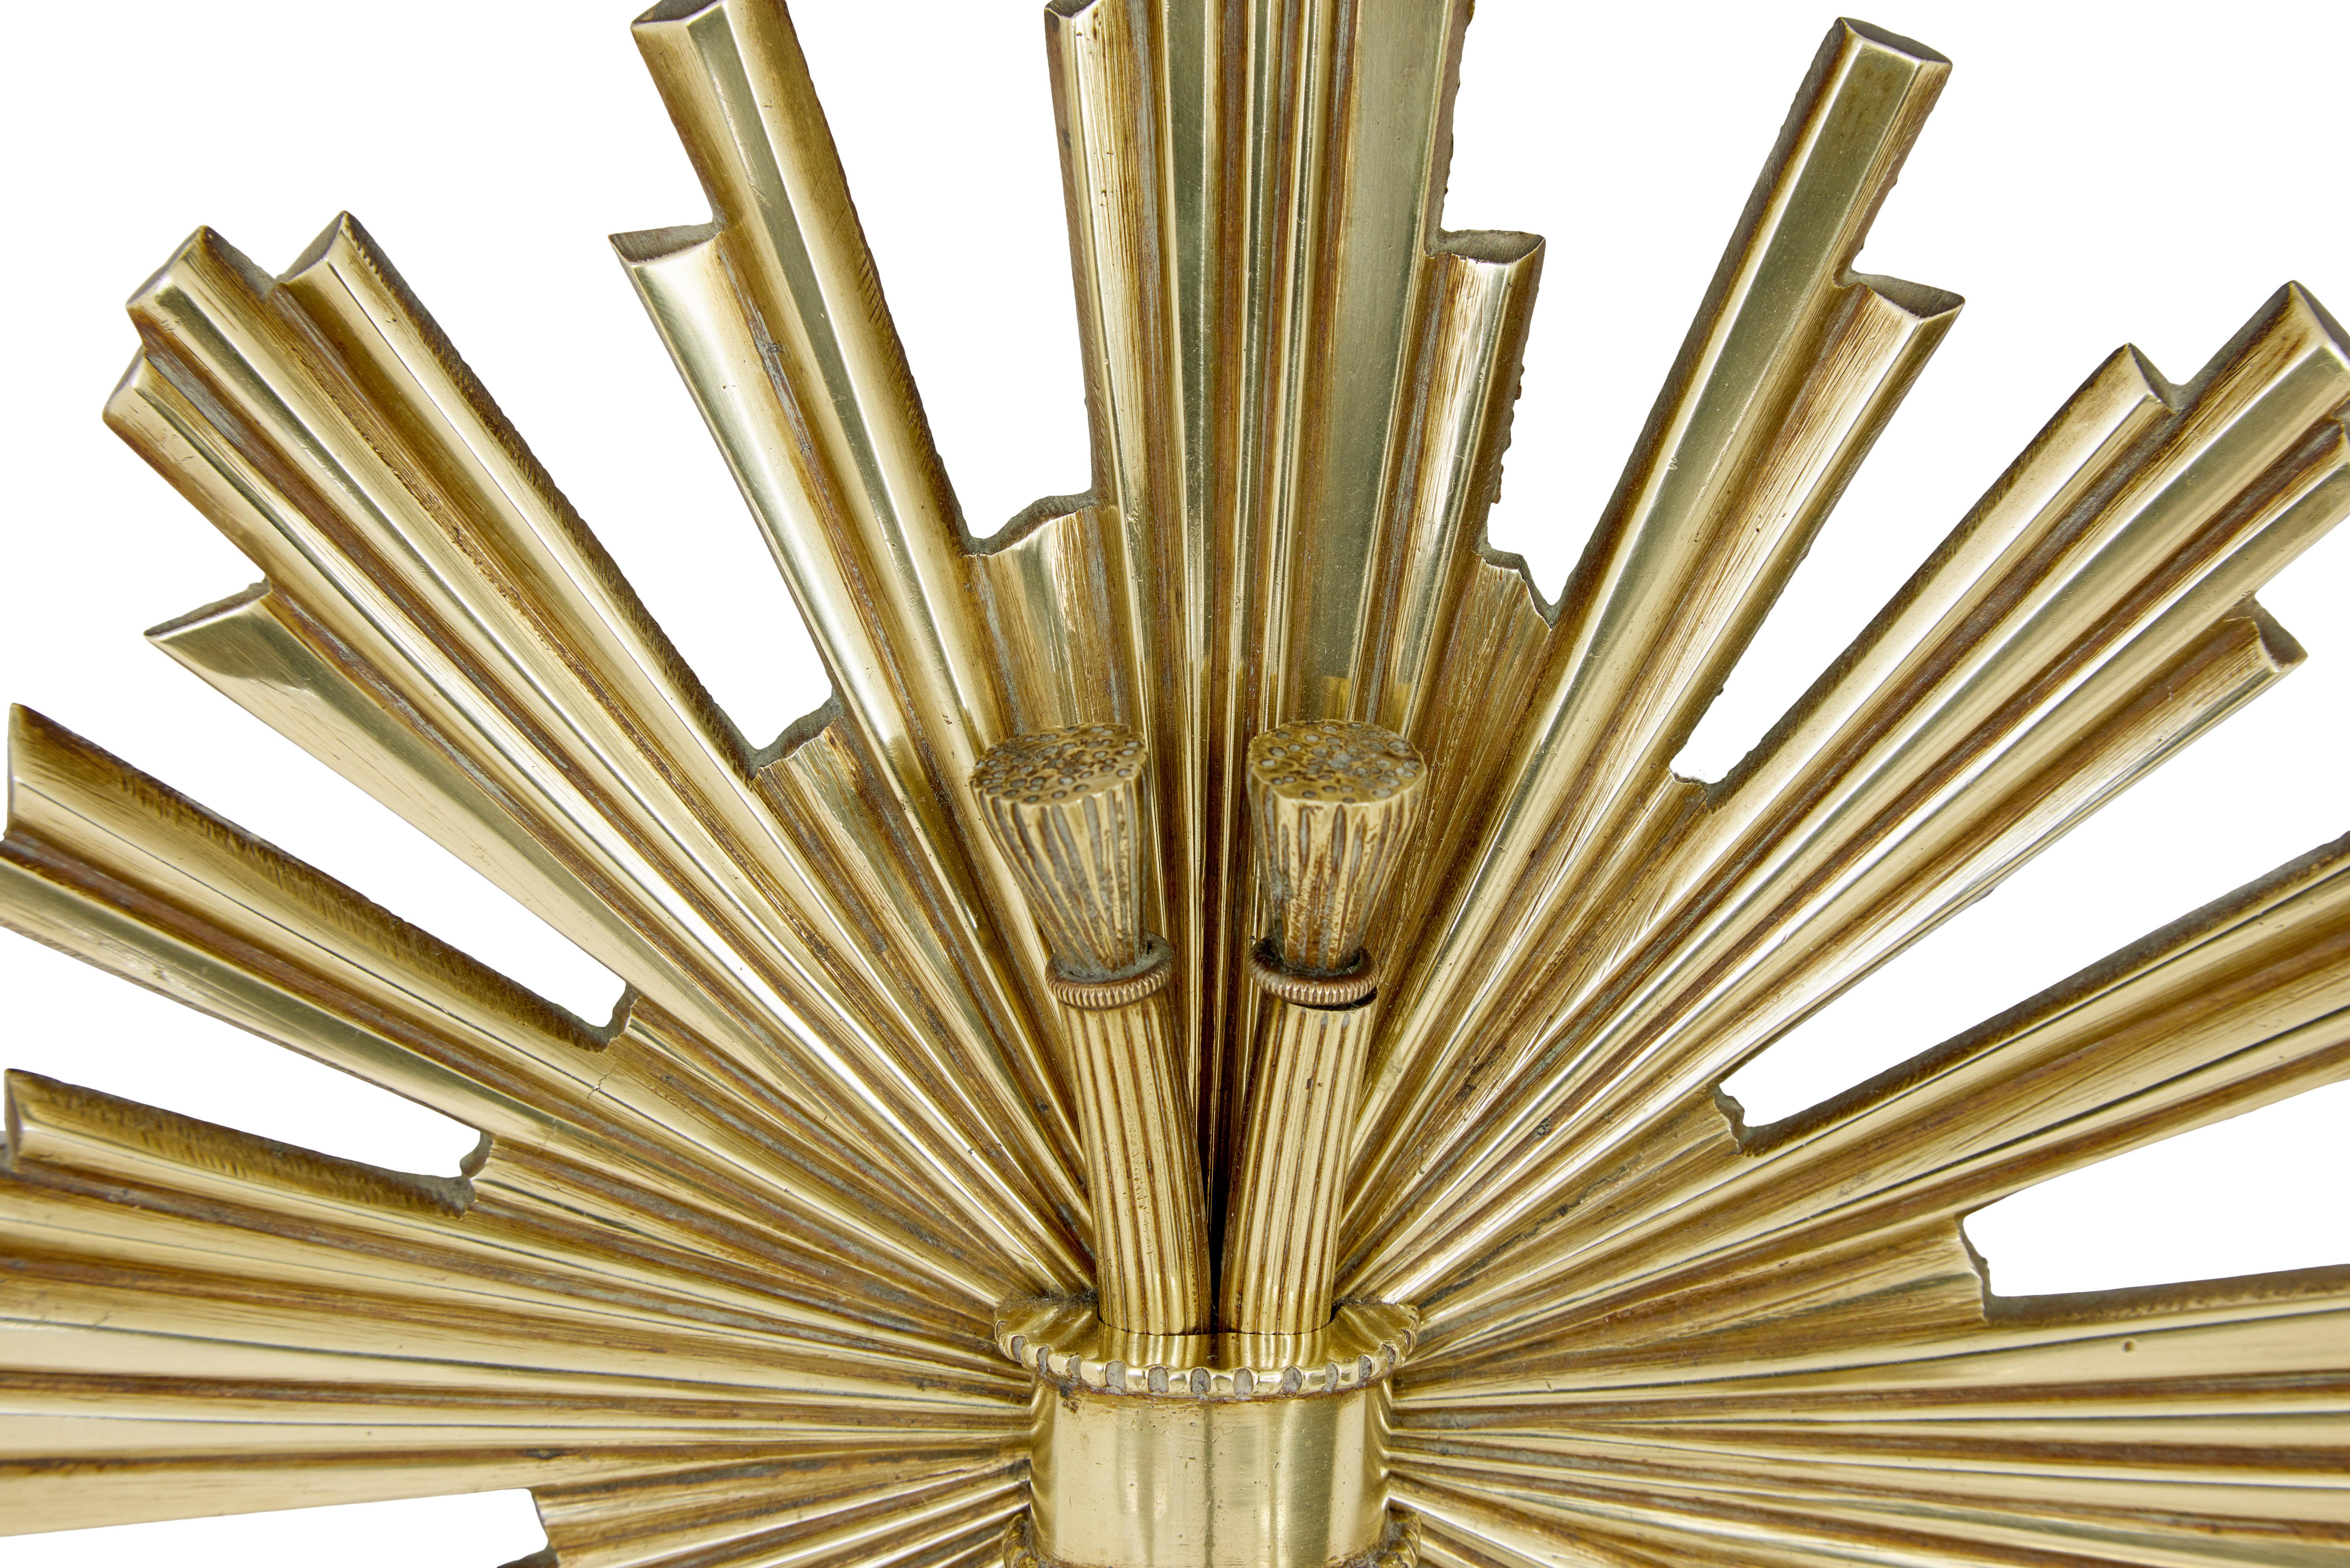 Quality pair of art deco gilt sunburst wall sconces In Good Condition For Sale In Debenham, Suffolk